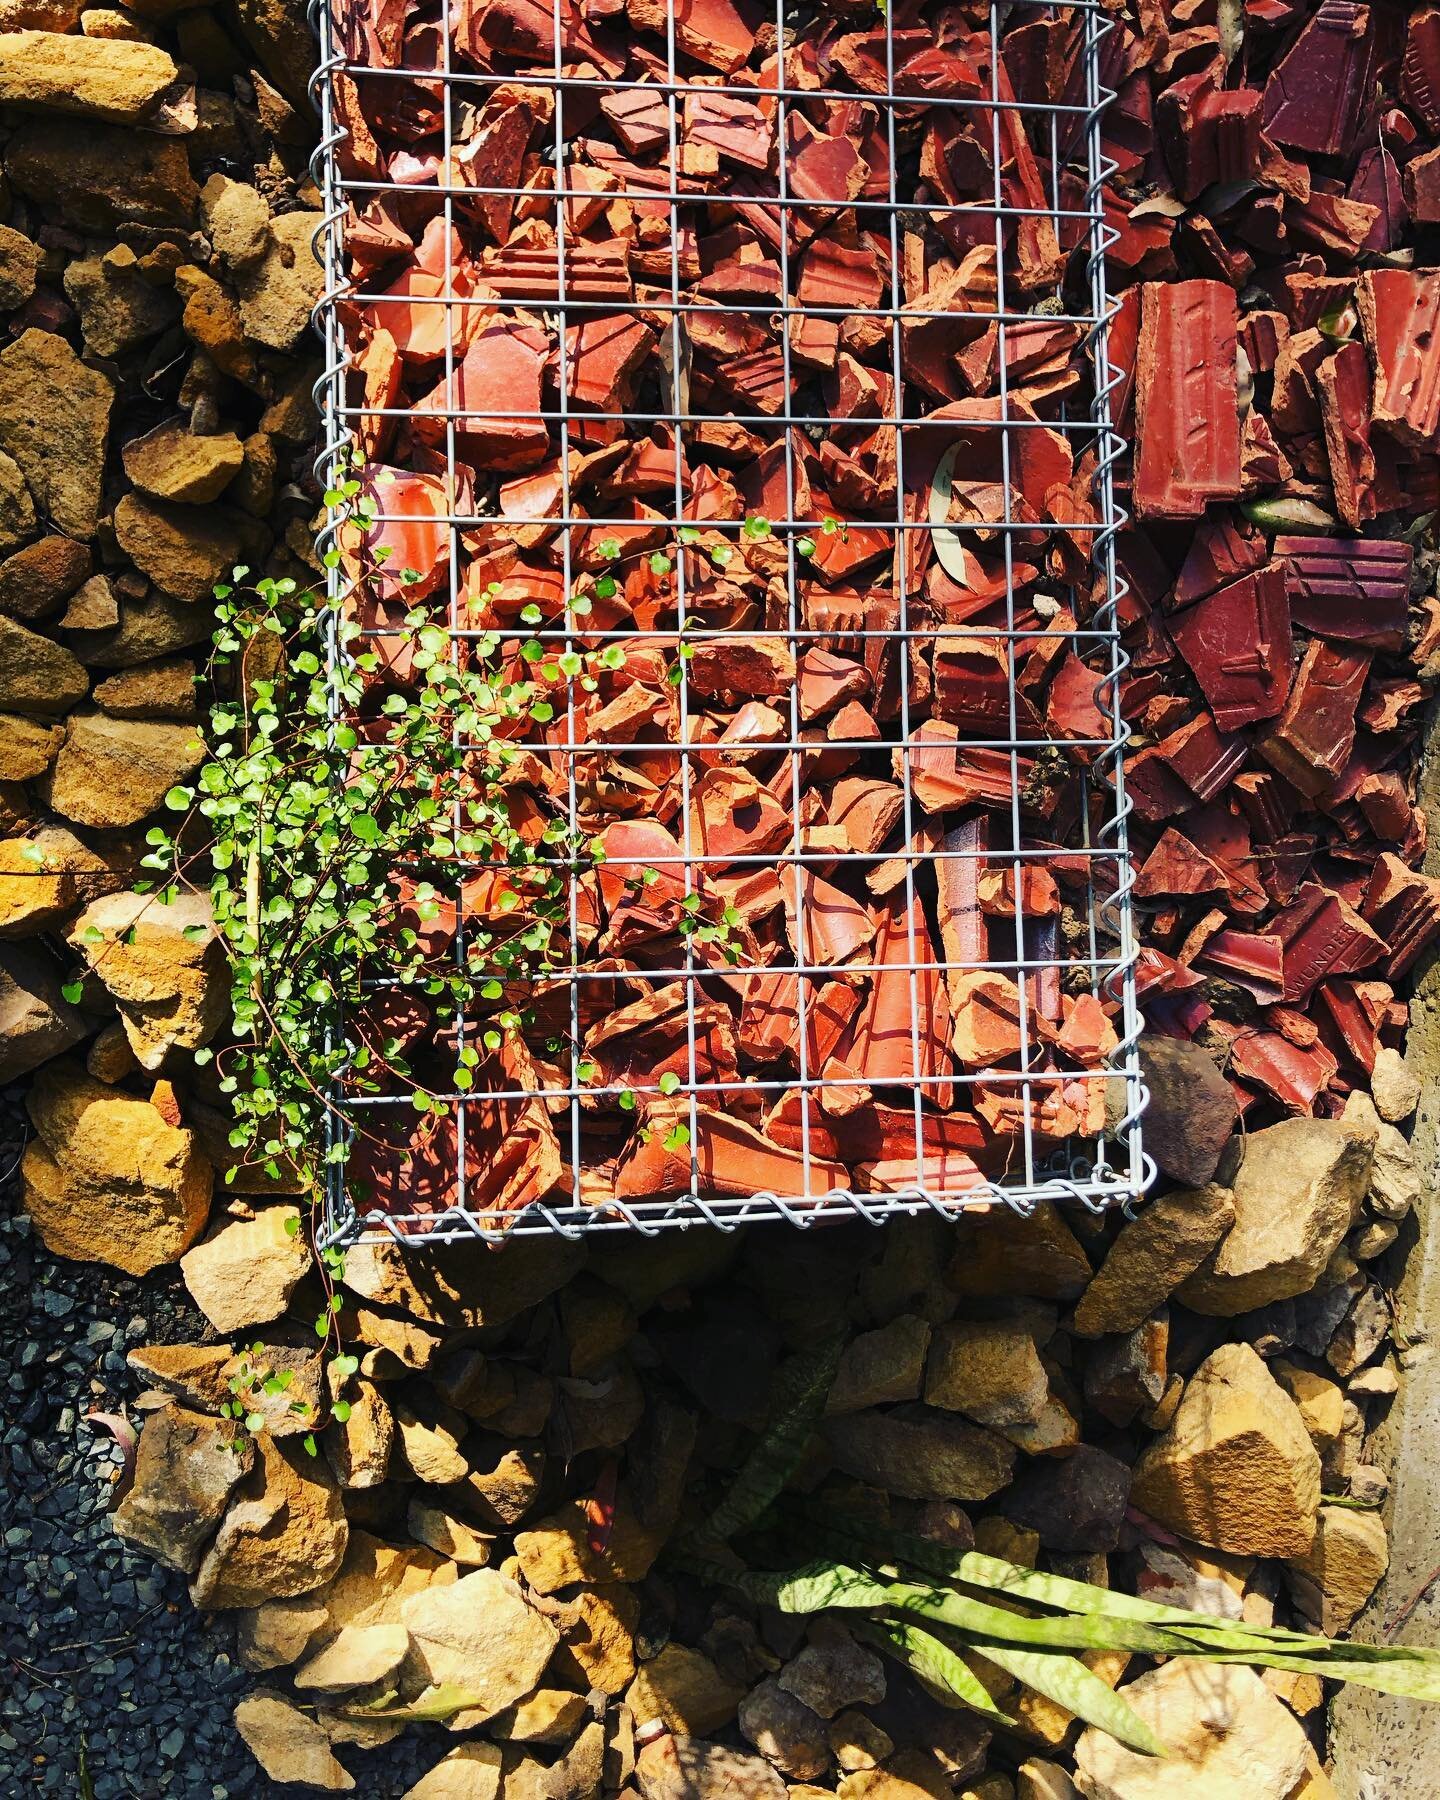 At our Coledale project, we decided to reuse the terracotta tiles for some gabion basket retaining walls. Reduce, Reuse, Recycle ♻️